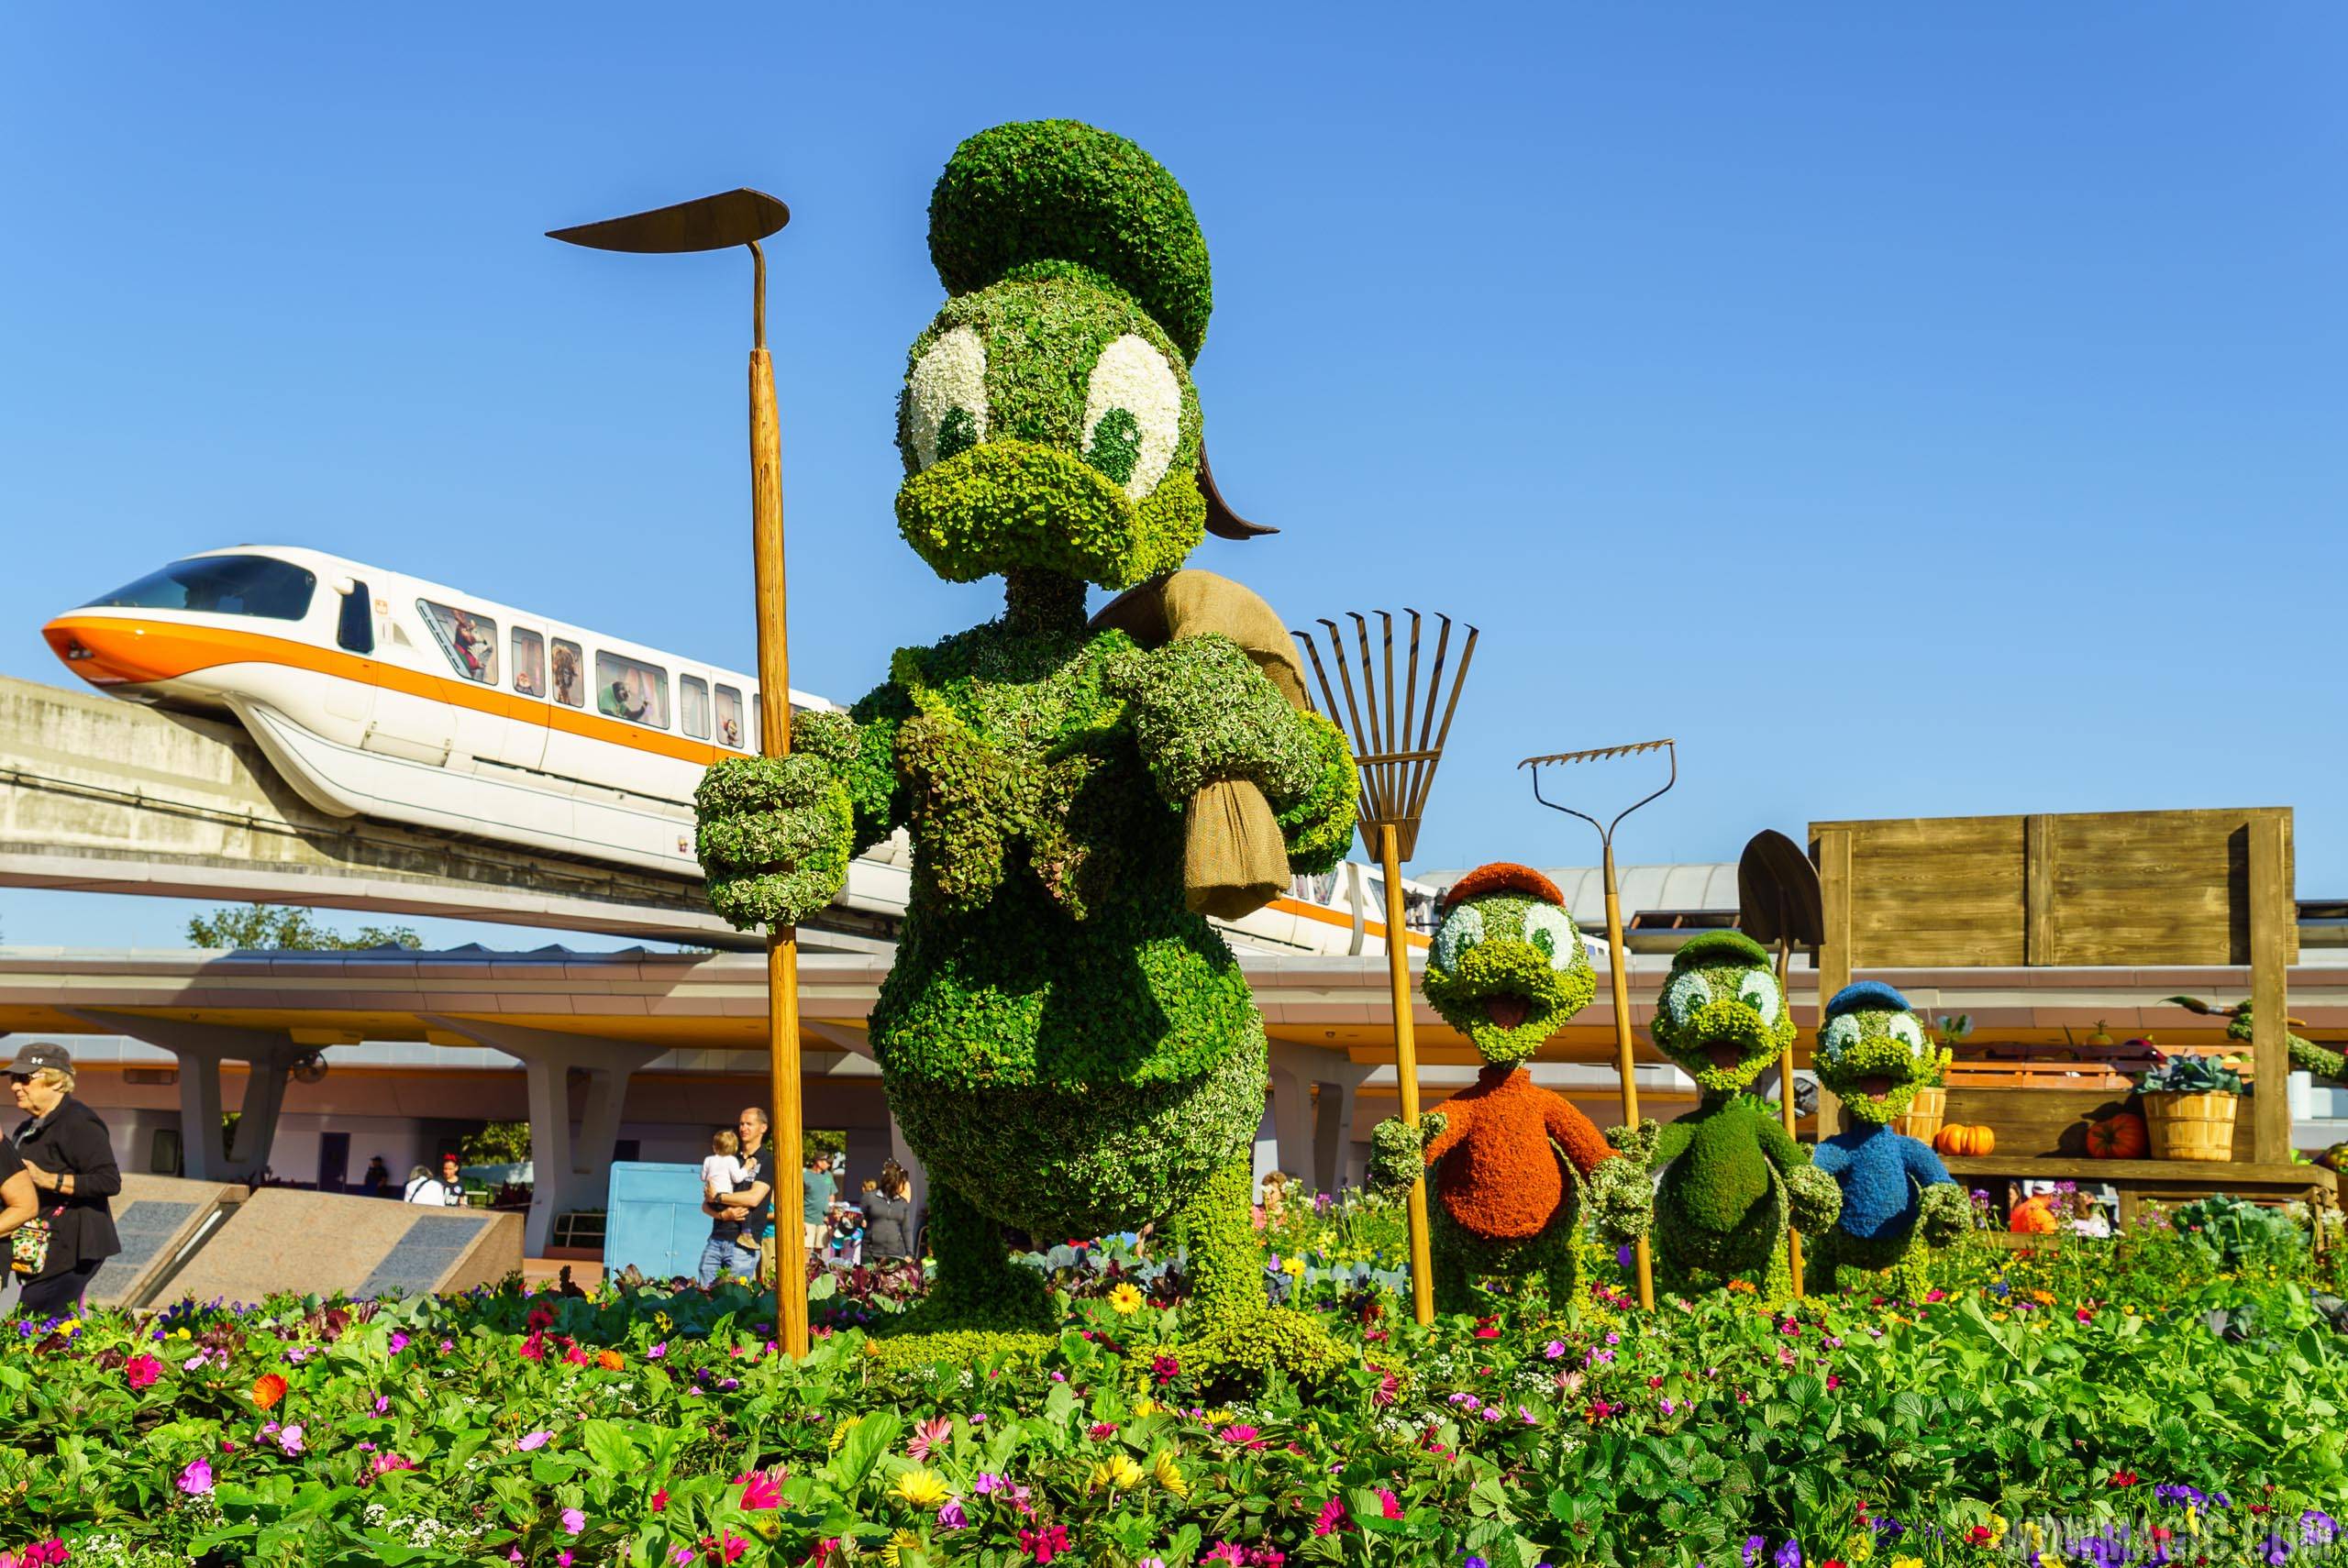 2016 Epcot International Flower and Garden Festival - Main entrance with Donald, Huey, Dewey and Louie